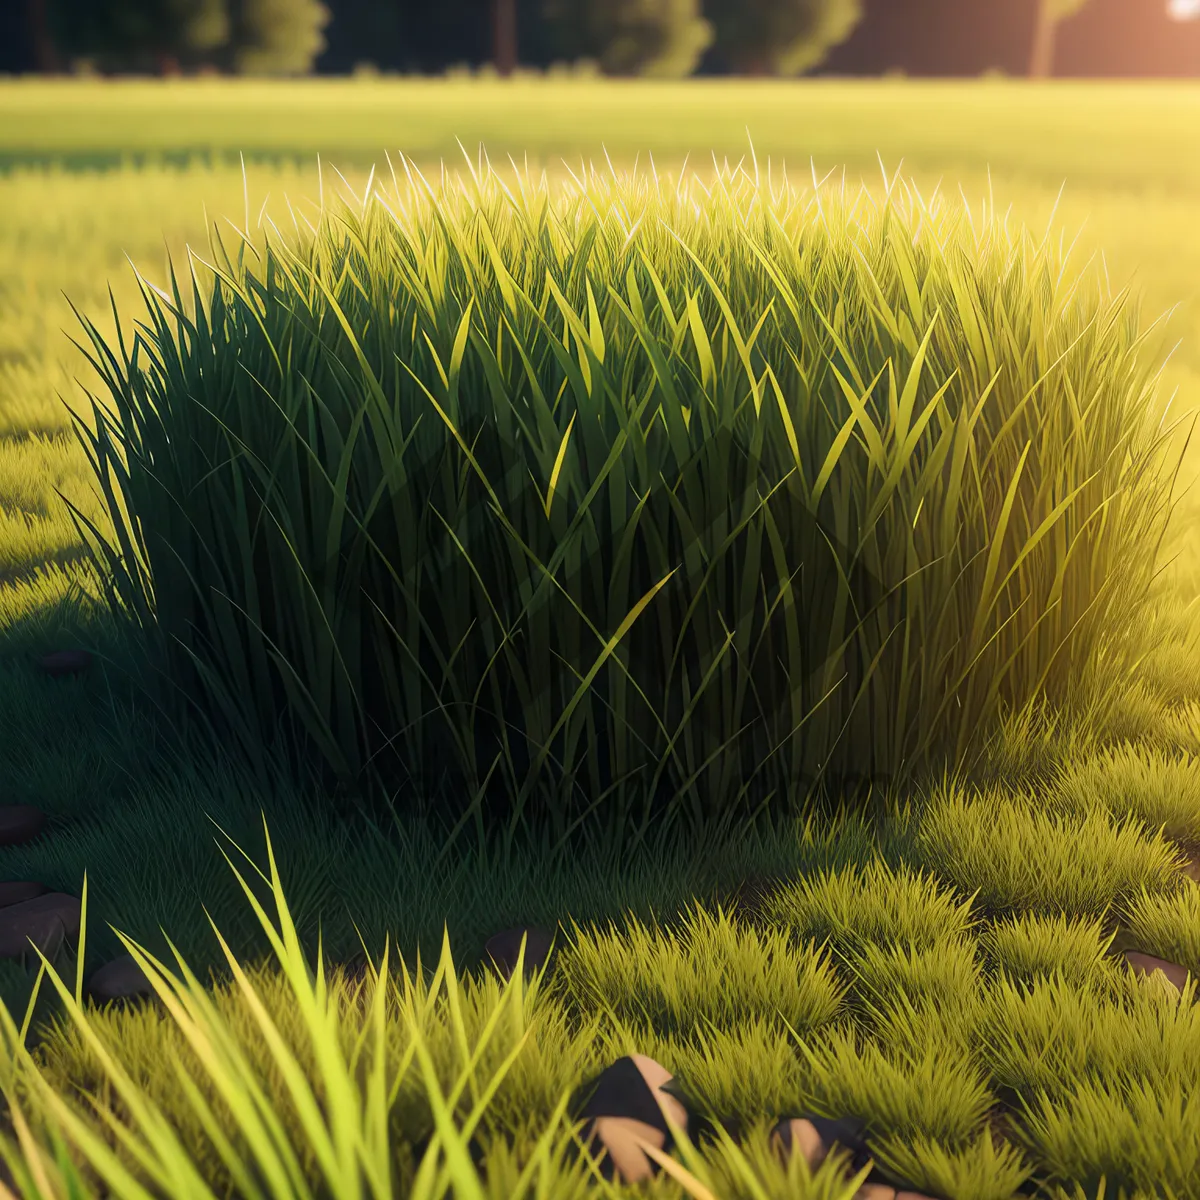 Picture of Sunlit Green Meadow with Wheat and Rice